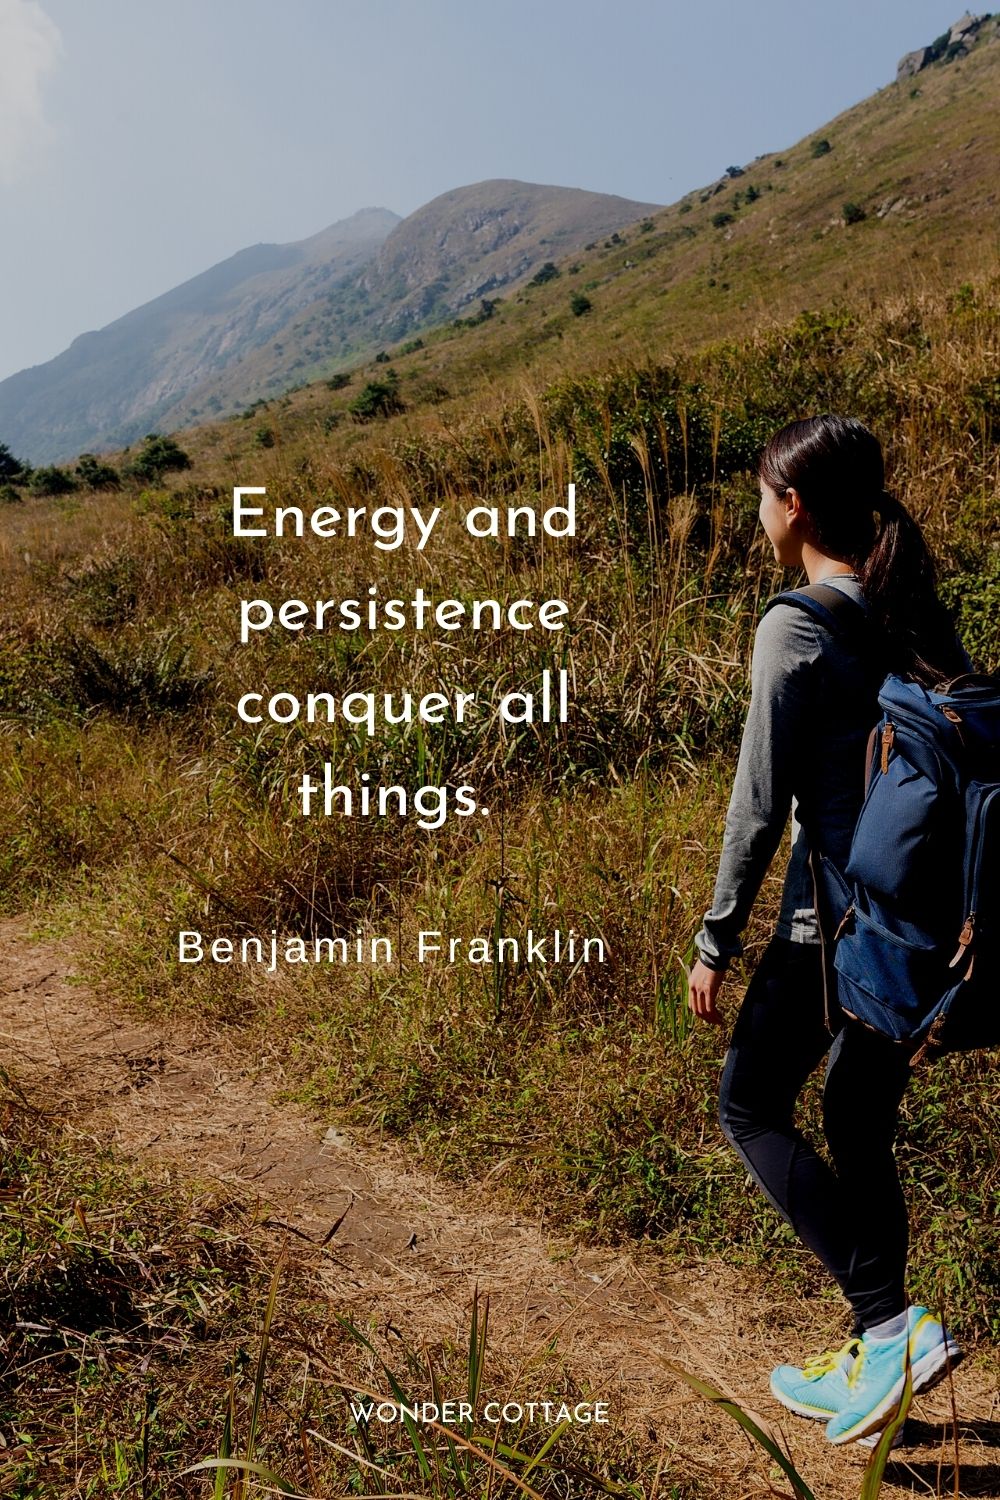 Energy and persistence conquer all things. Benjamin Franklin